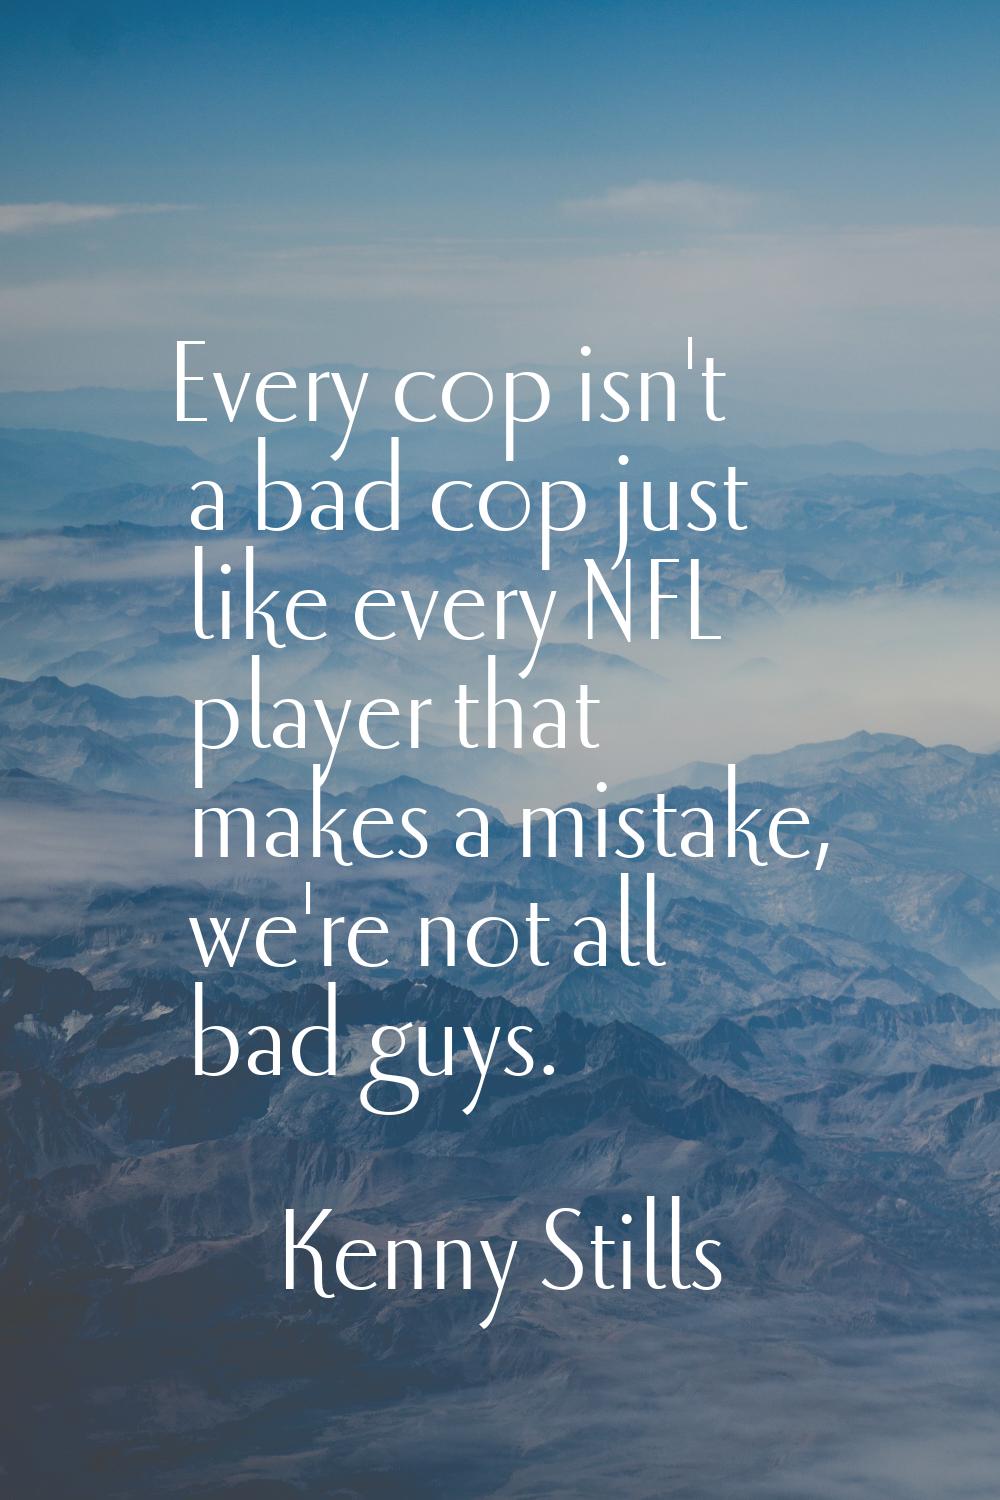 Every cop isn't a bad cop just like every NFL player that makes a mistake, we're not all bad guys.